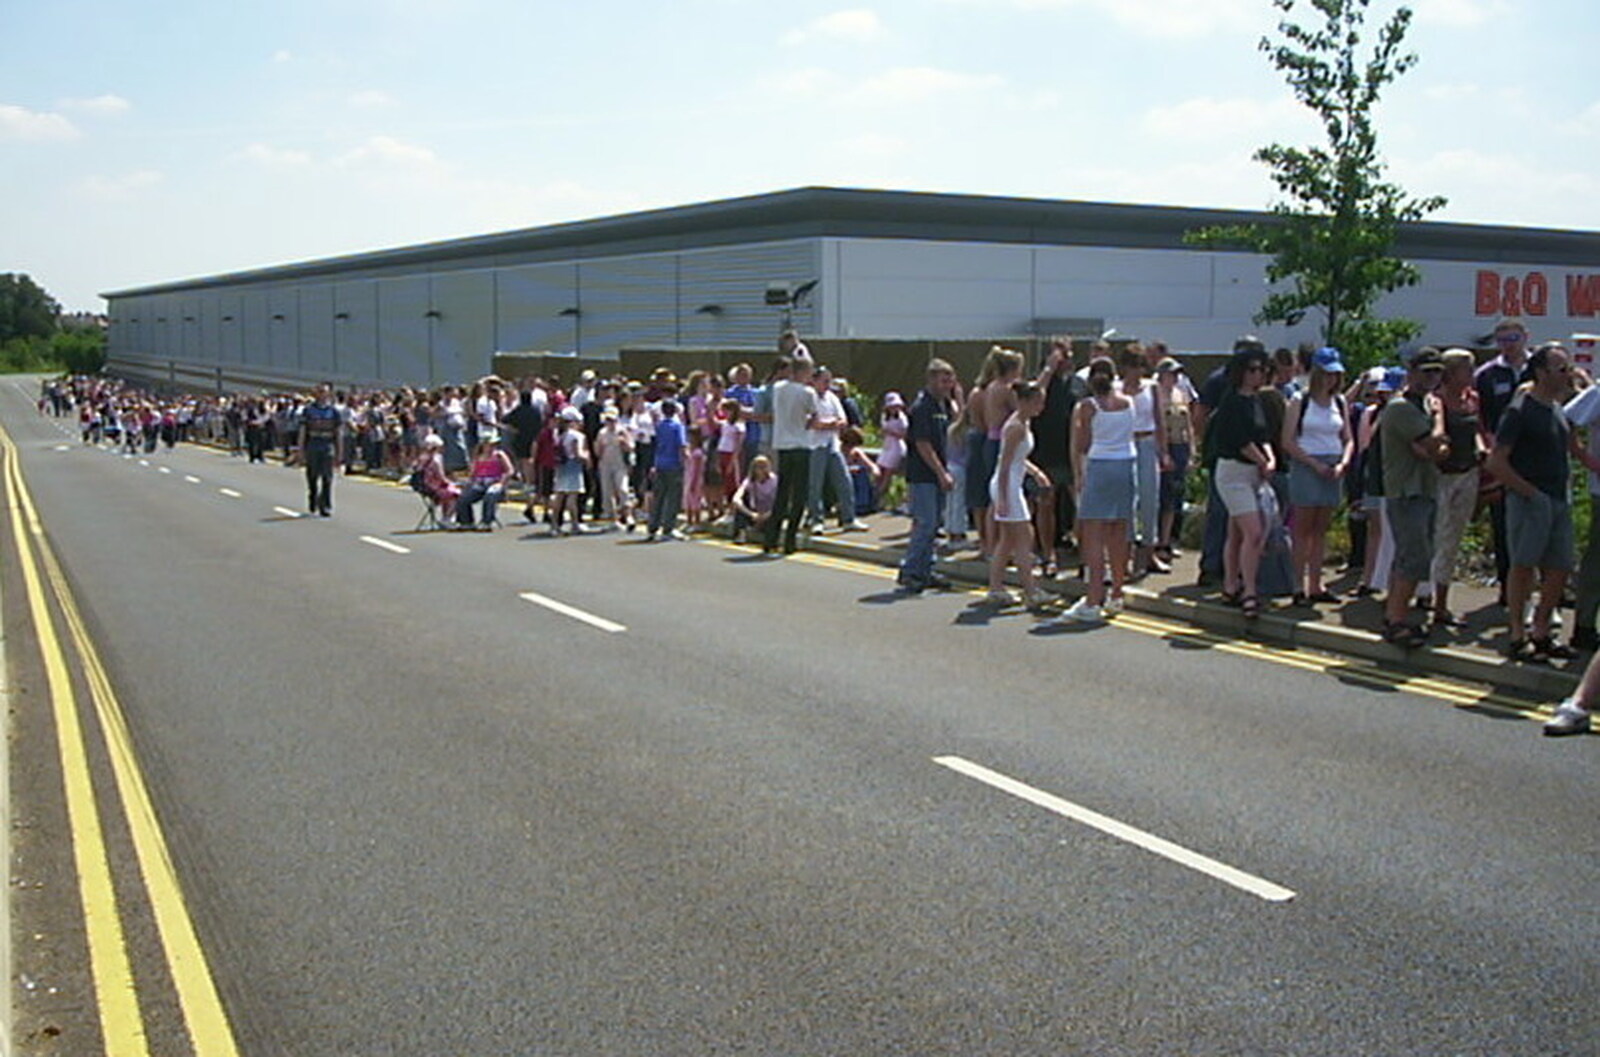 The queue for the bus to Chantry Park from Radio 1's One Big Sunday, Chantry Park, Ipswich - 14th July 2002